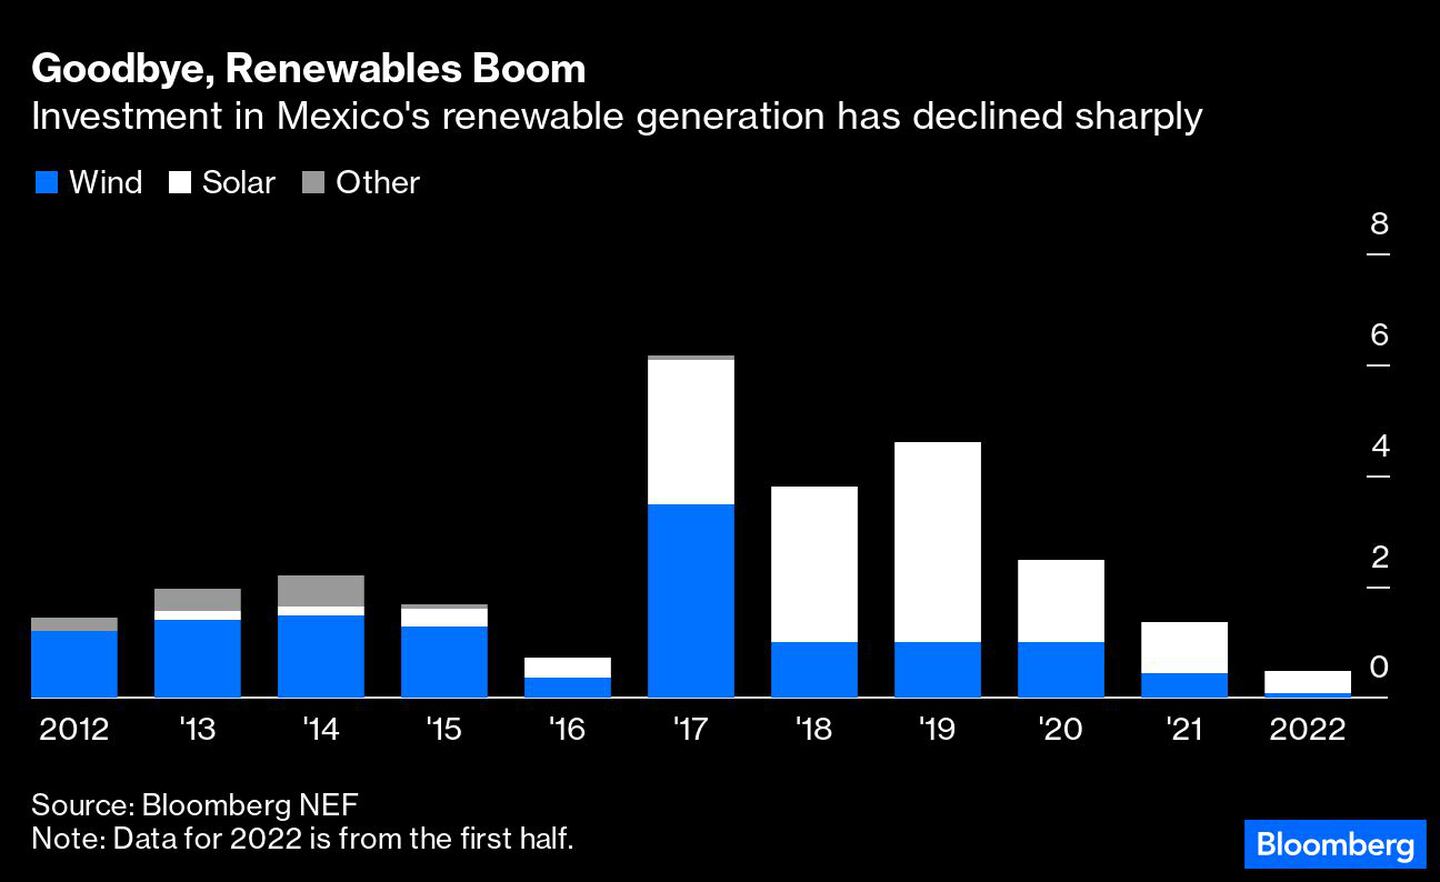 Goodbye, Renewables Boom | Investment in Mexico's renewable generation has declined sharplydfd